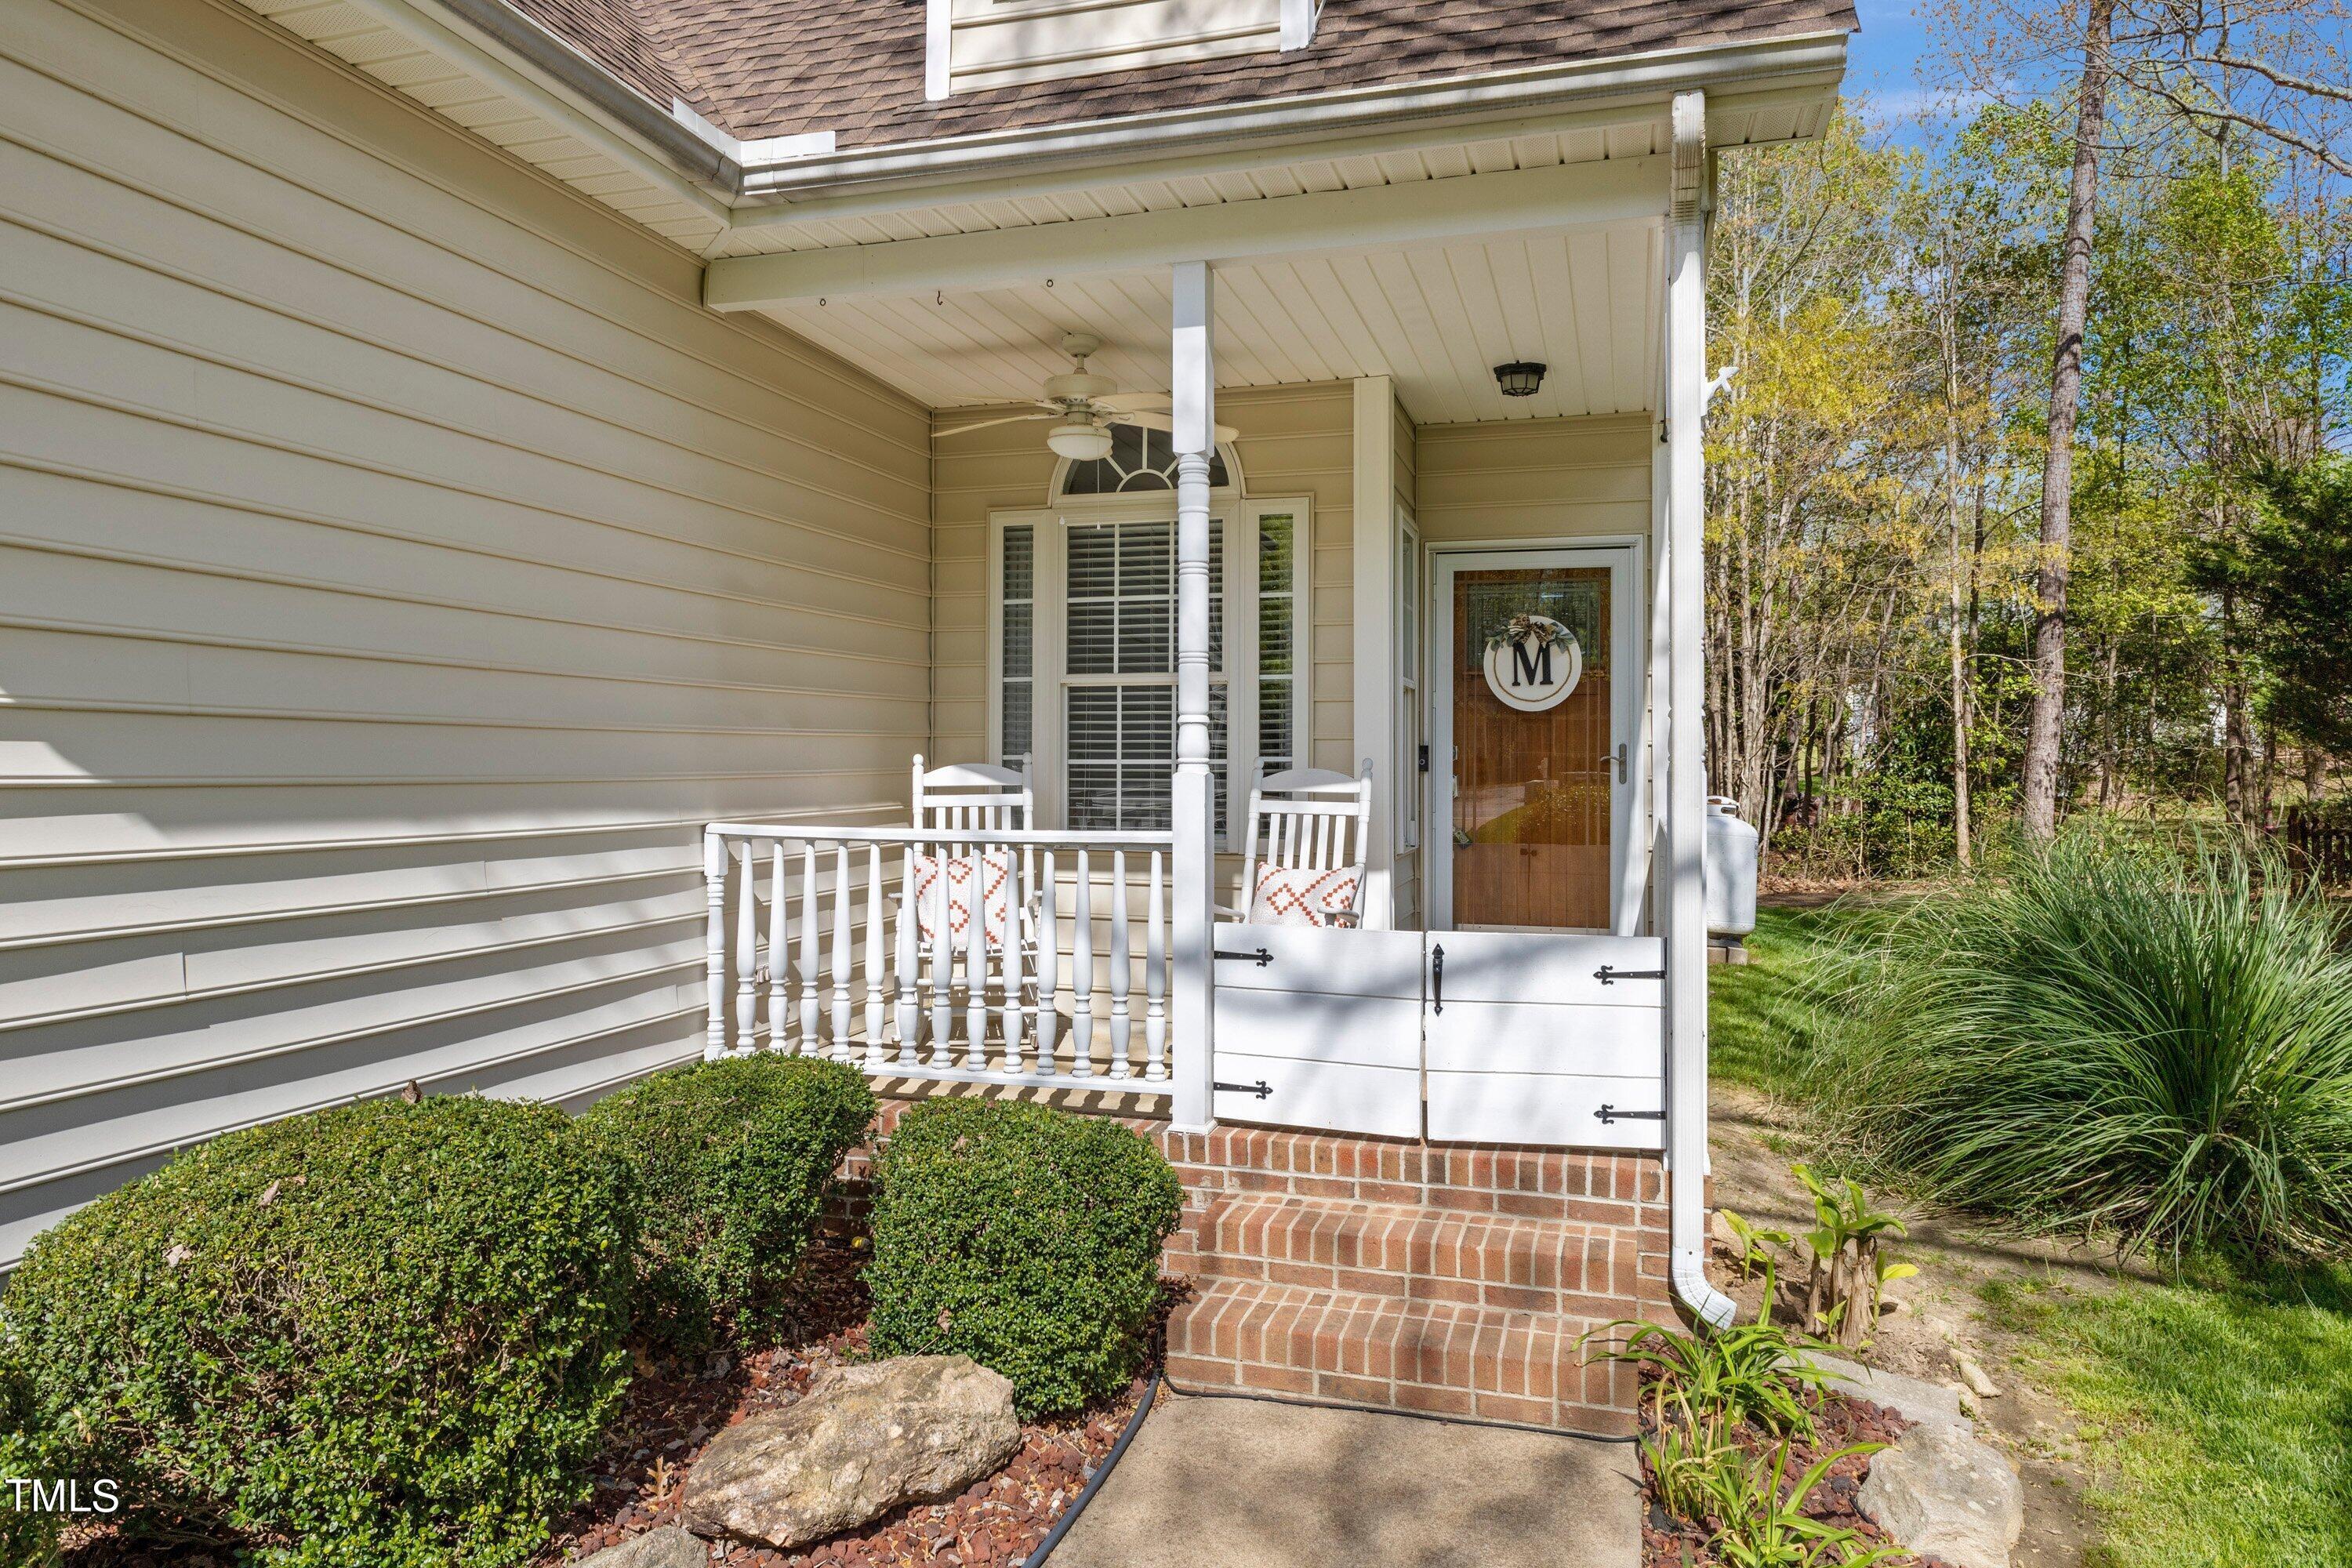 Photo one of 916 Lotus Ln Wake Forest NC 27587 | MLS 10021495